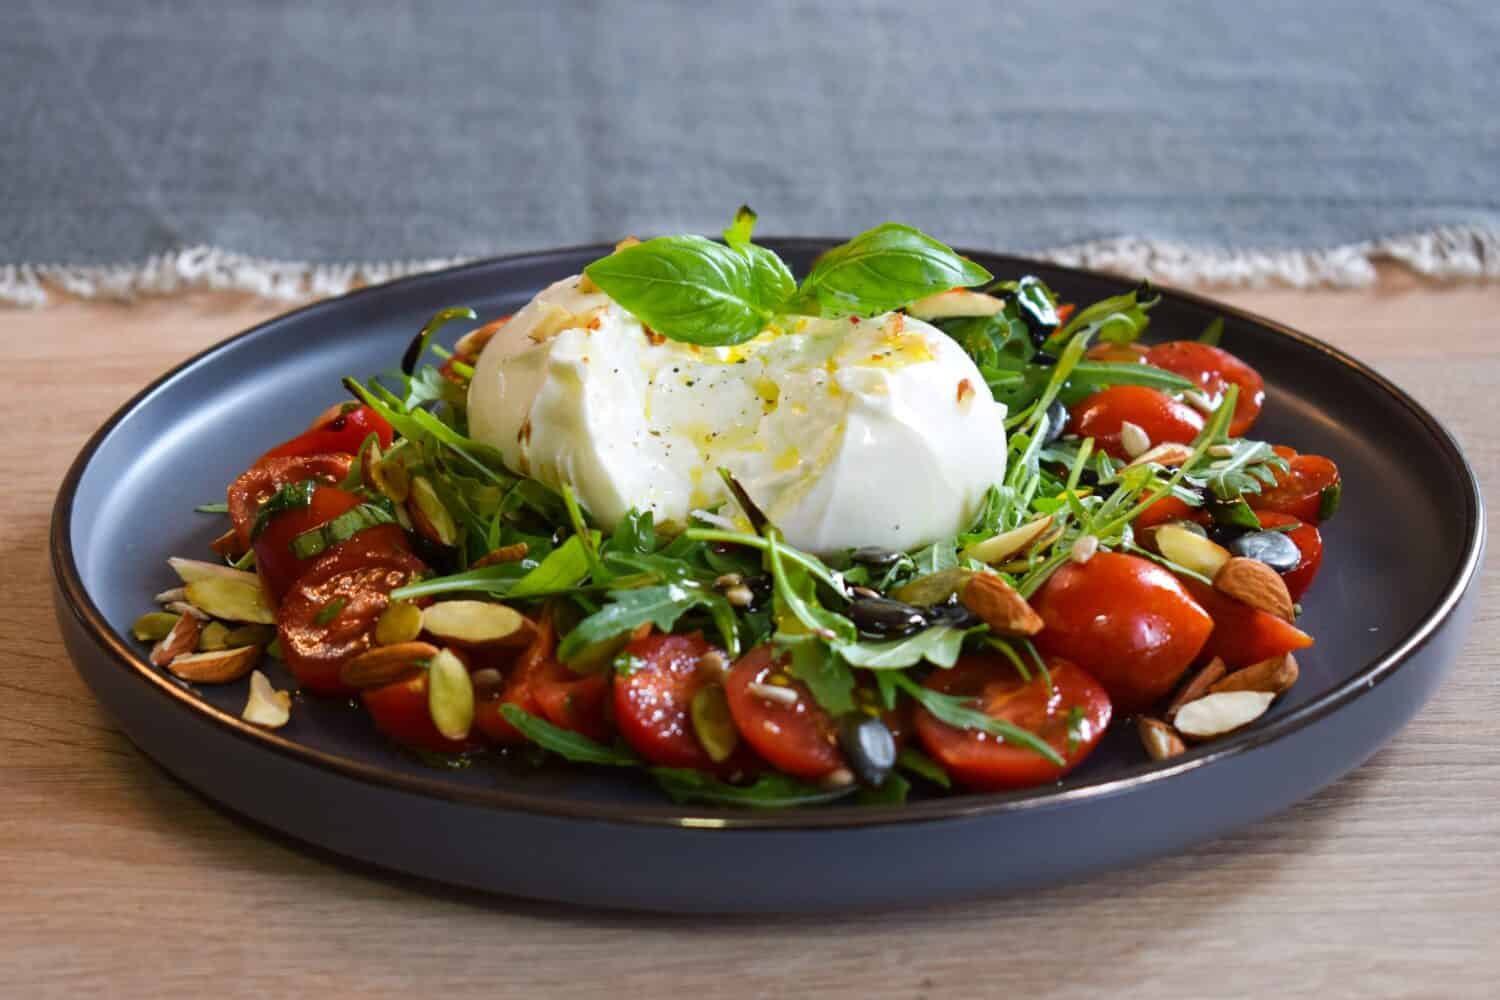 Burrata Salad with Cherry Tomatoes, Rucola, Basil, Olive Oil and Balsamic Creme. Burrata fresh cheeses tastes amazing and can be served alongside tomatoes, grilled bread, or vegetables.